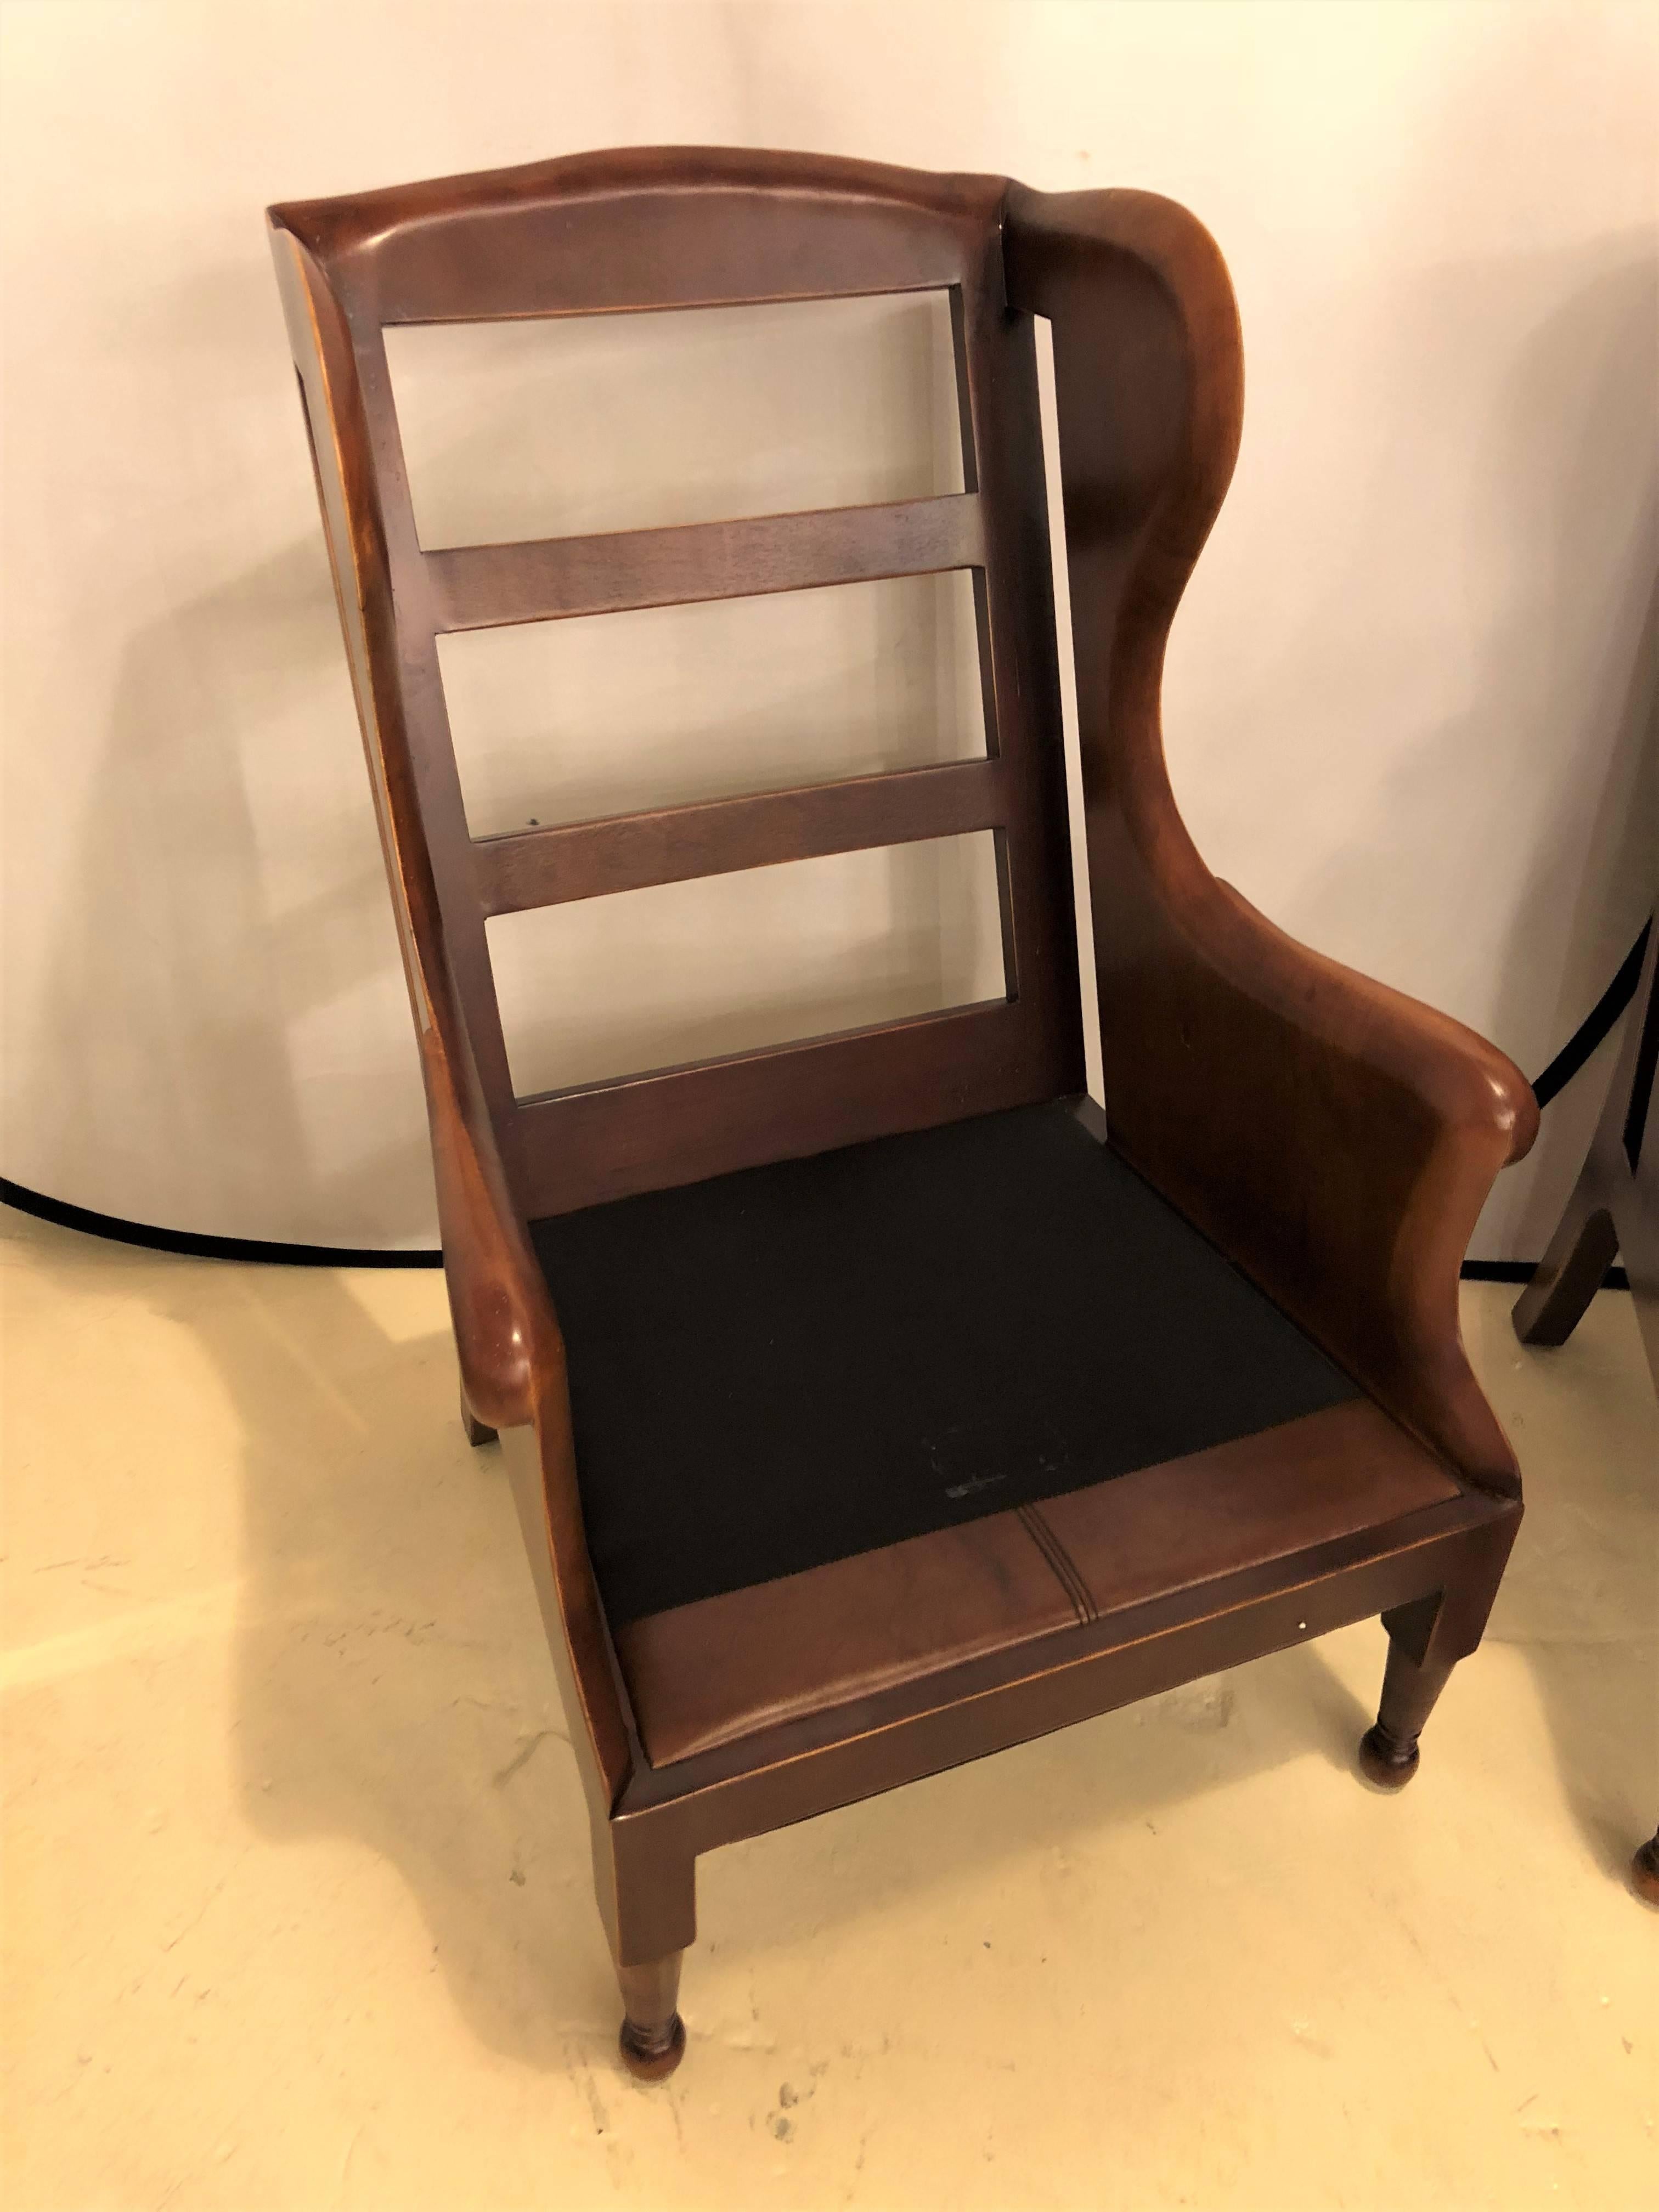 A pair of fine leather lounge or bergere chairs. Both having solid wooden framed in the ladder back style with cushioned leather seats and backrests.